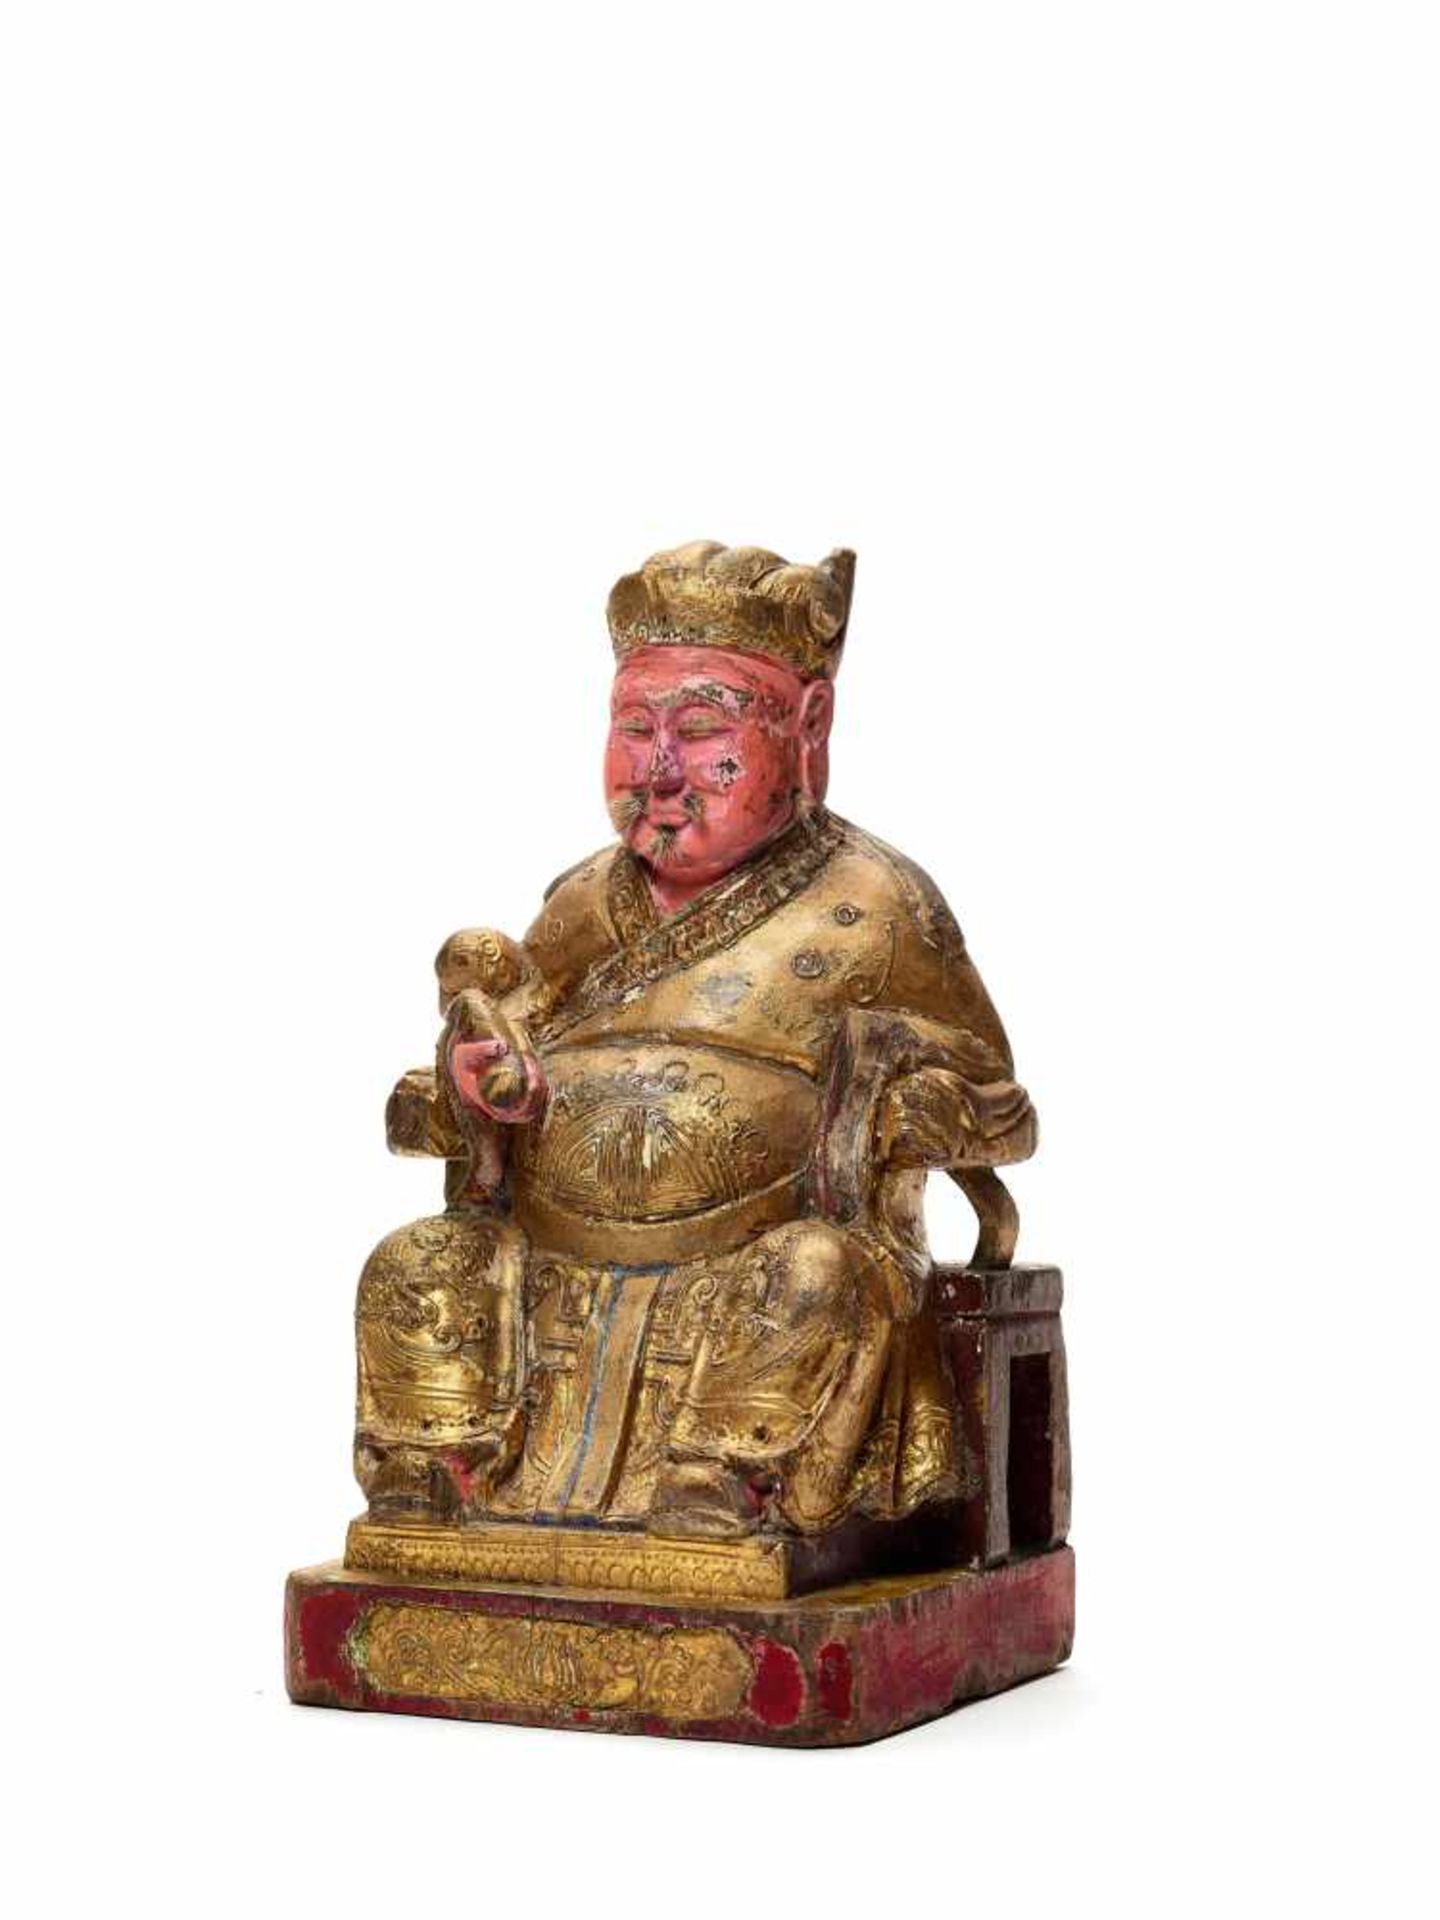 A POLYCHROME LACQUERED AND GILT WOOD FIGURE OF GUANDI, 17TH-18TH CENTURYWood, lacquer, gesso